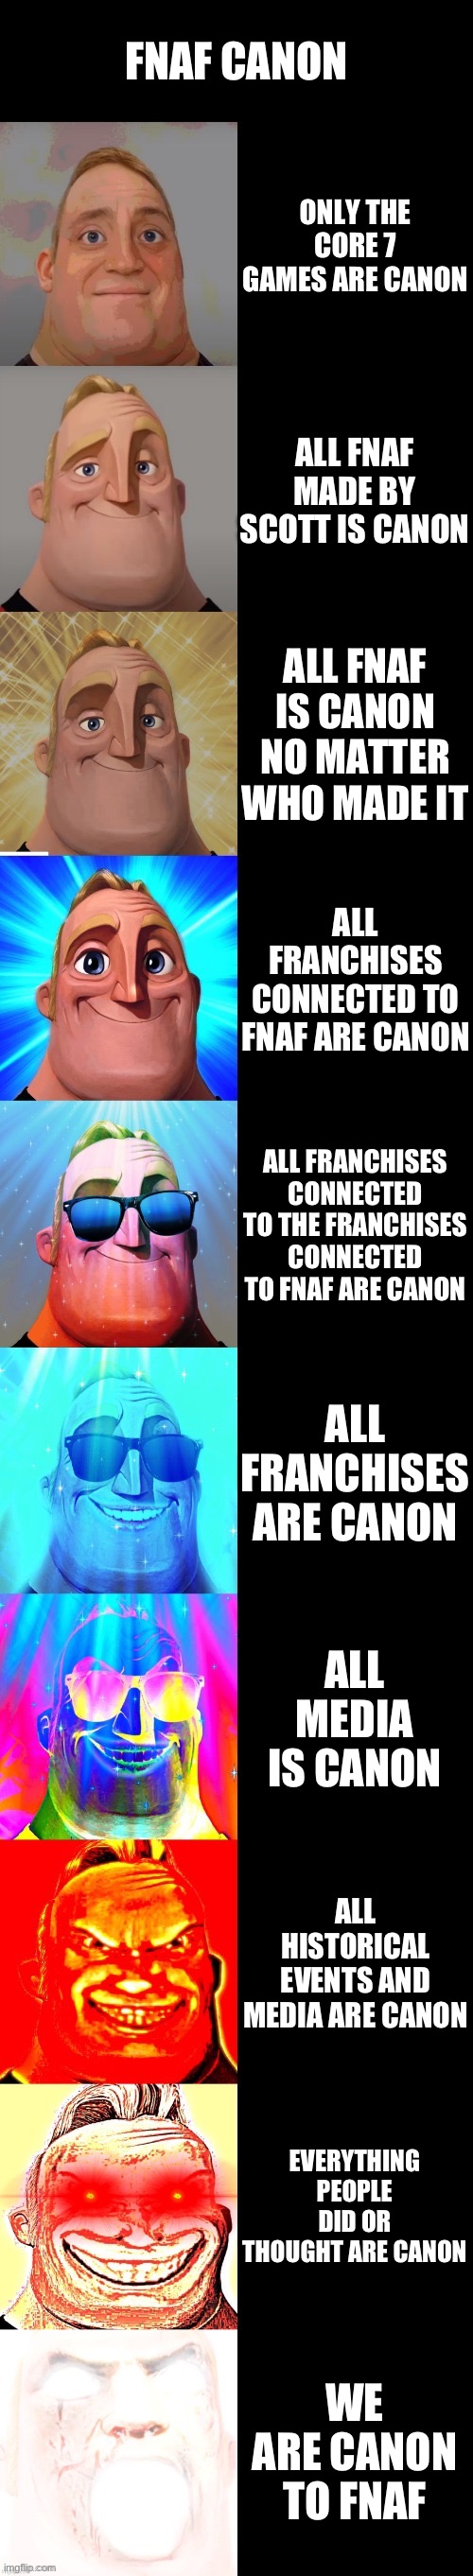 This meme is canon | FNAF CANON; ONLY THE CORE 7 GAMES ARE CANON; ALL FNAF MADE BY SCOTT IS CANON; ALL FNAF IS CANON NO MATTER WHO MADE IT; ALL FRANCHISES CONNECTED TO FNAF ARE CANON; ALL FRANCHISES CONNECTED TO THE FRANCHISES CONNECTED TO FNAF ARE CANON; ALL FRANCHISES ARE CANON; ALL MEDIA IS CANON; ALL HISTORICAL EVENTS AND MEDIA ARE CANON; EVERYTHING PEOPLE DID OR THOUGHT ARE CANON; WE ARE CANON TO FNAF | image tagged in mr incredible becoming canny,canon,fnaf | made w/ Imgflip meme maker